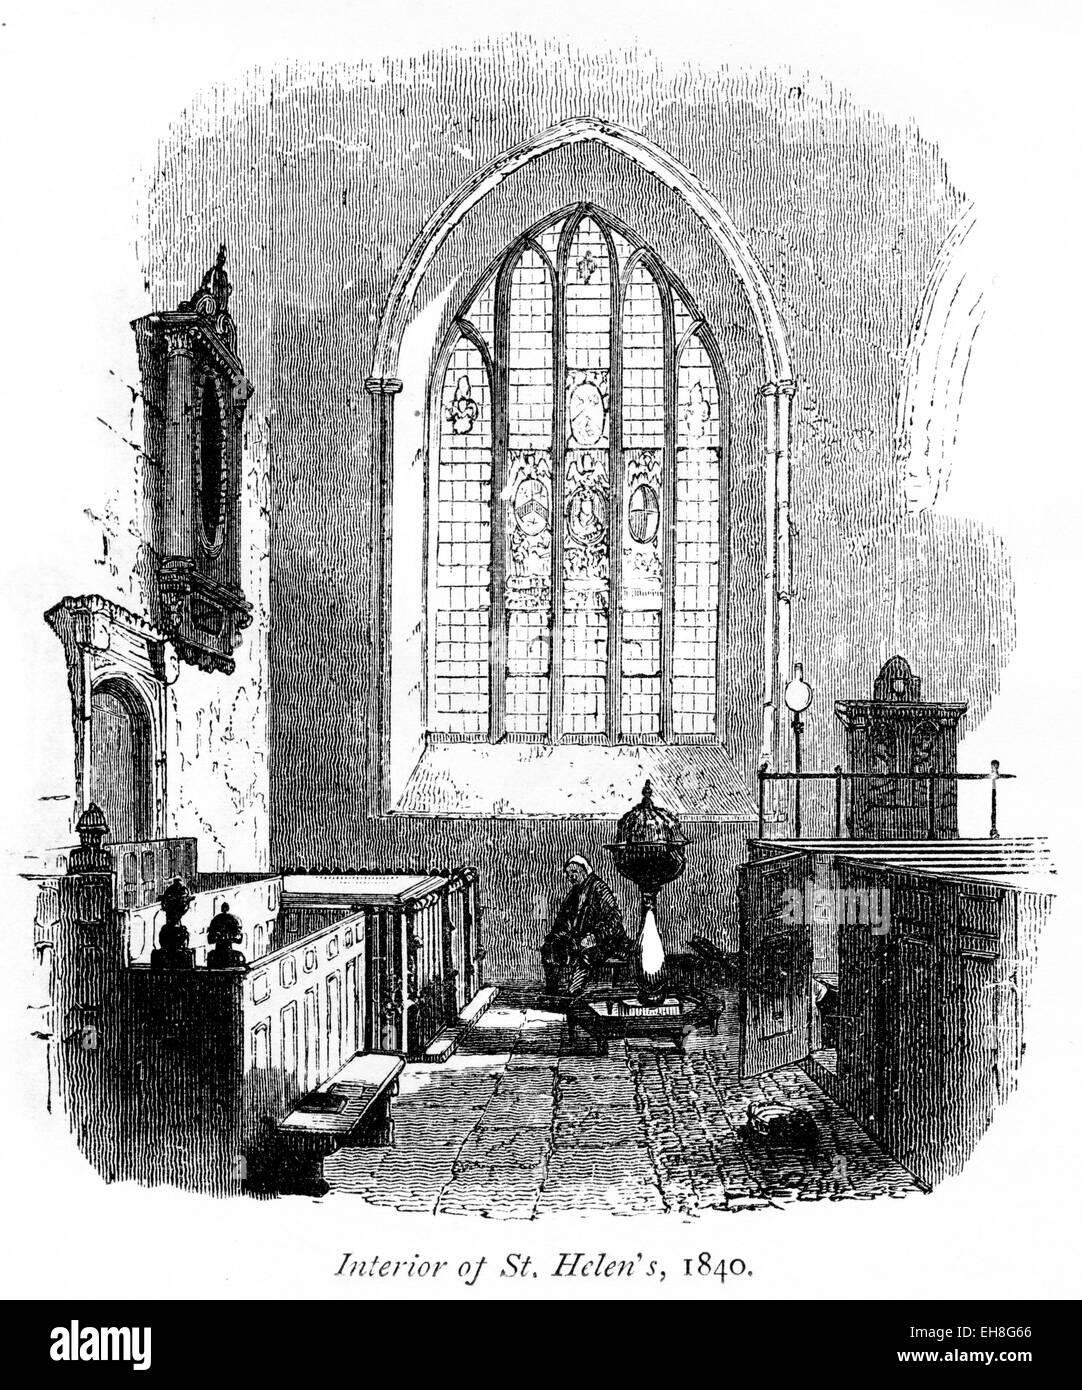 An engraving of the Interior of St. Helen's Church, Bishopsgate in 1840 scanned at high resolution from a book printed in 1867. Stock Photo